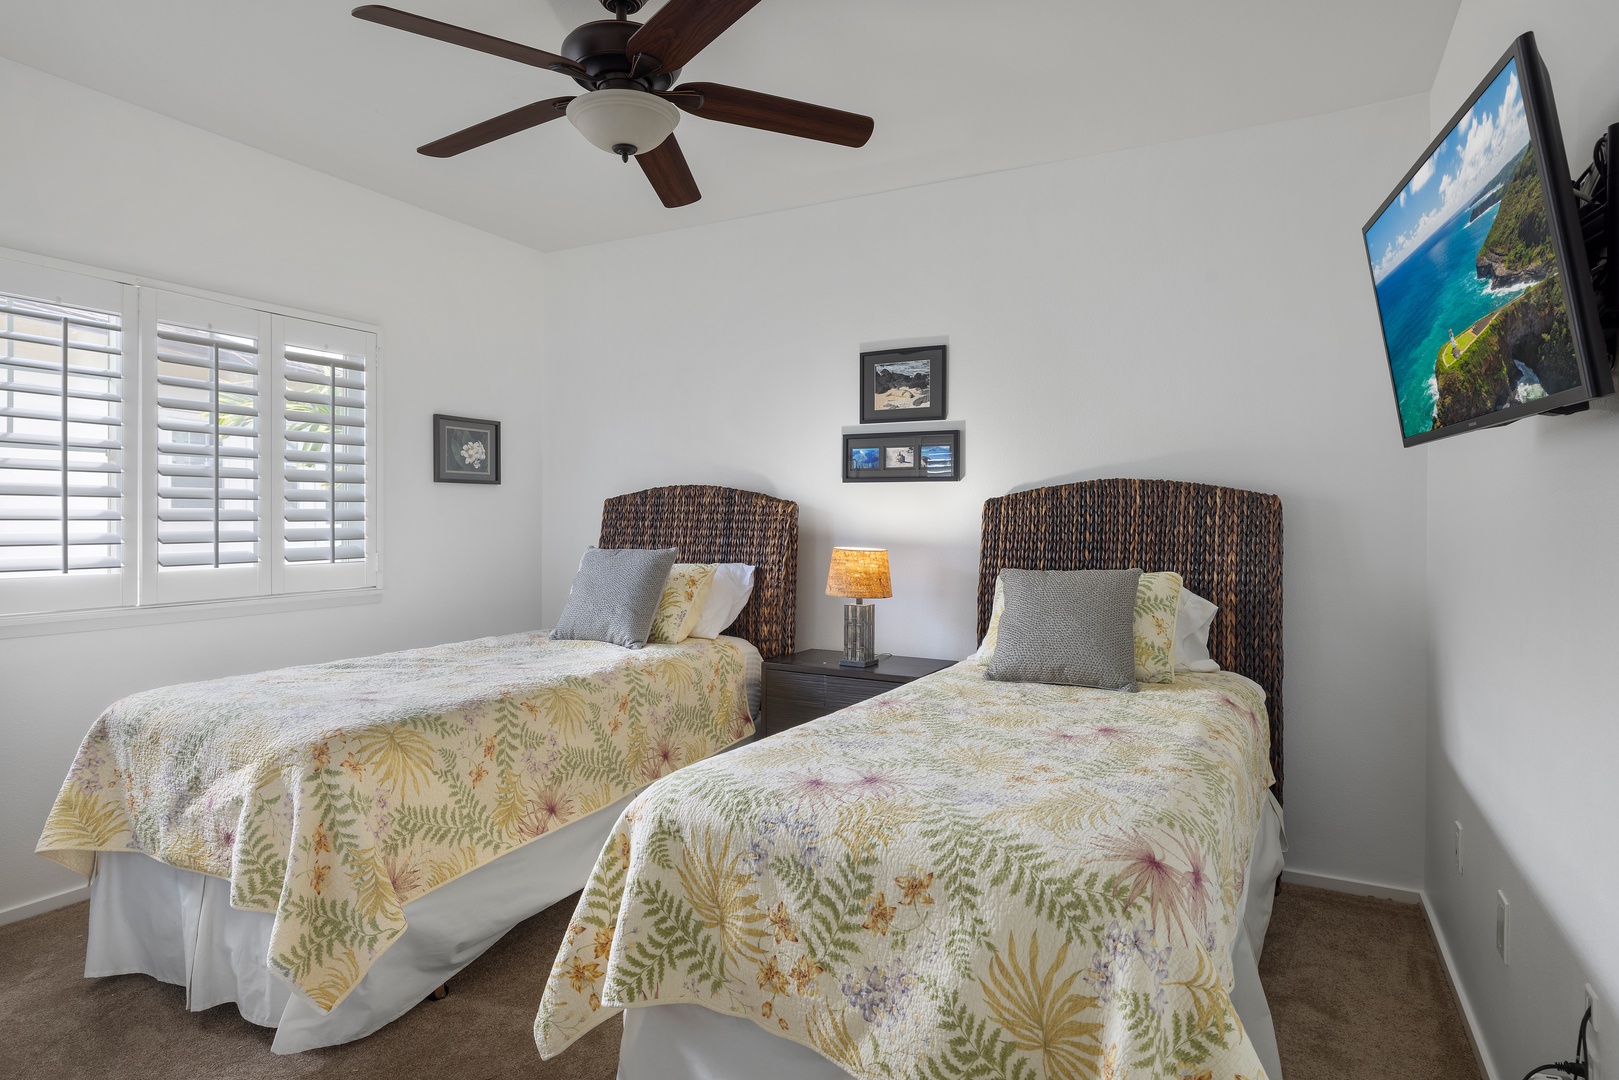 Kapolei Vacation Rentals, Coconut Plantation 1190-1 - The third guest bedroom with twin beds and island hospitality.